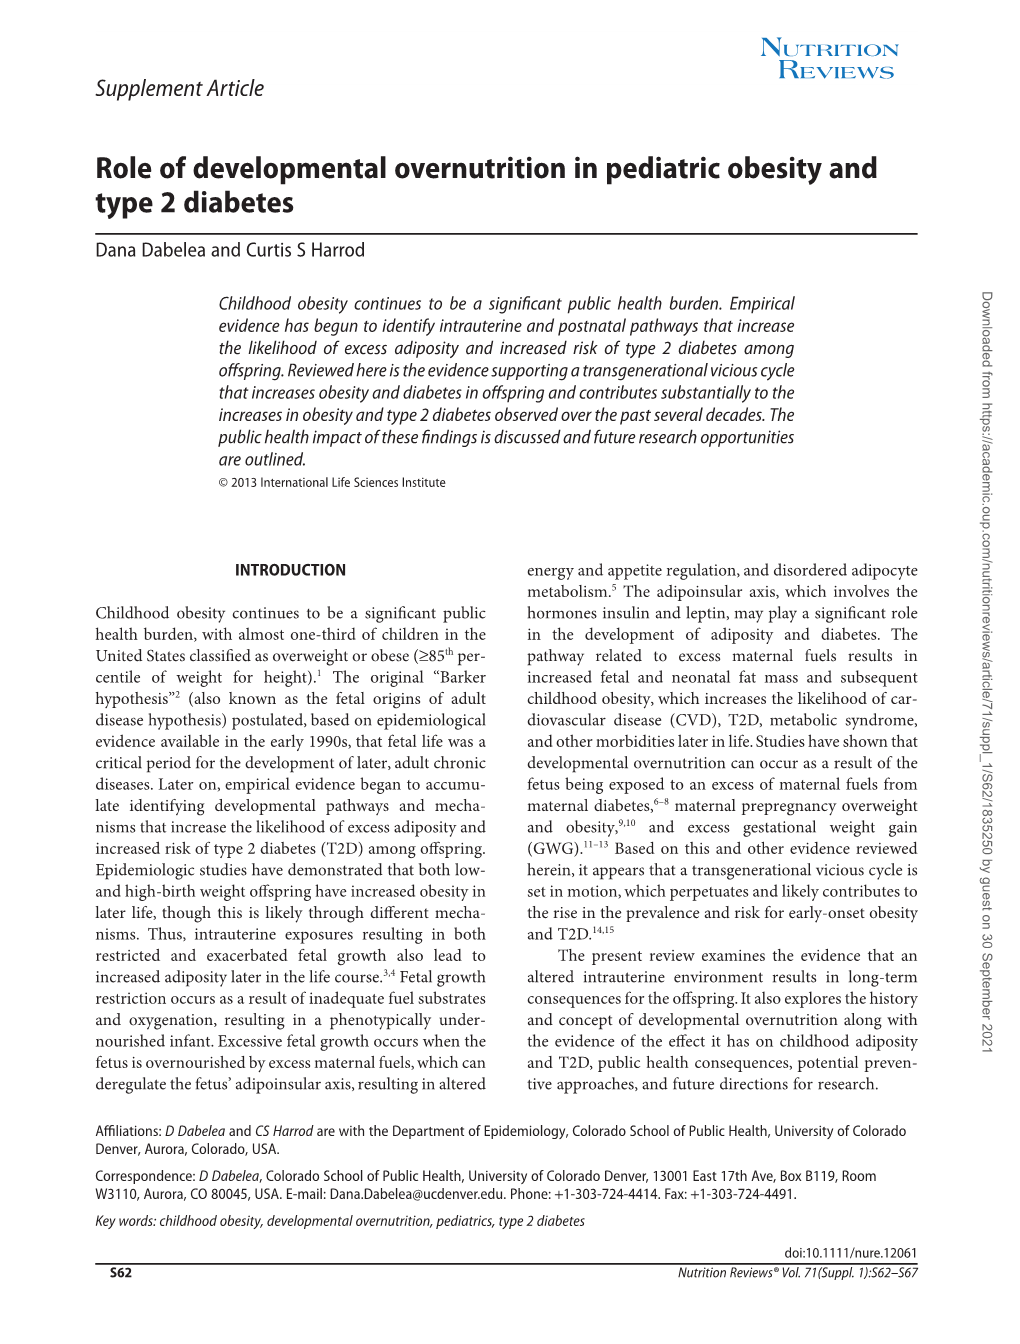 Role of Developmental Overnutrition in Pediatric Obesity and Type 2 Diabetes